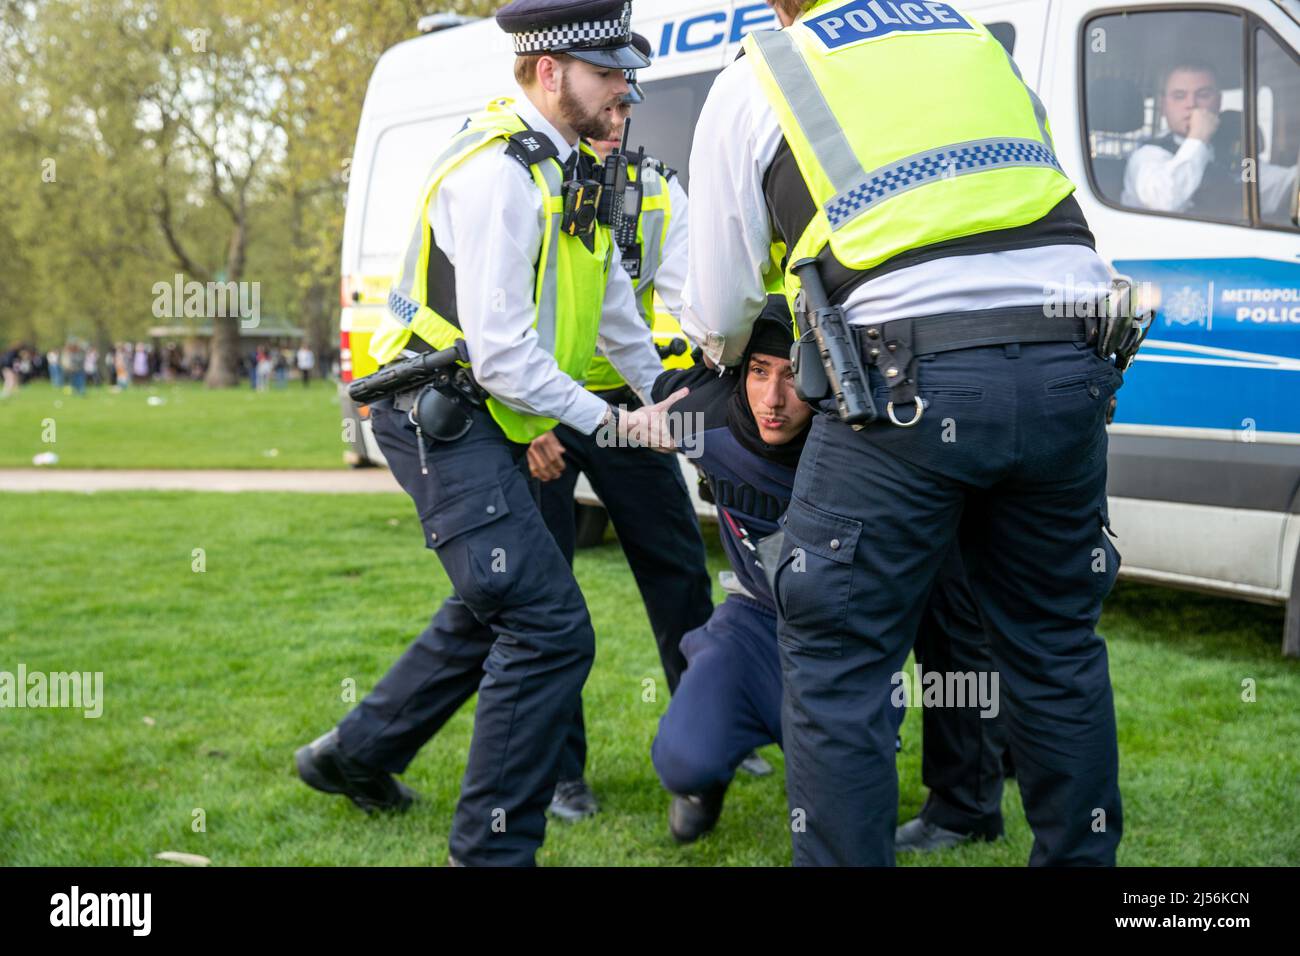 LONDON, APRIL 20 2022. Arrests made as thousands gather in London's Hyde Park to celebrate 4/20 otherwise known as World Weed Day,: The event is observed annually across the world by cannabis smokers in protest for the legalization of marijuana. Stock Photo